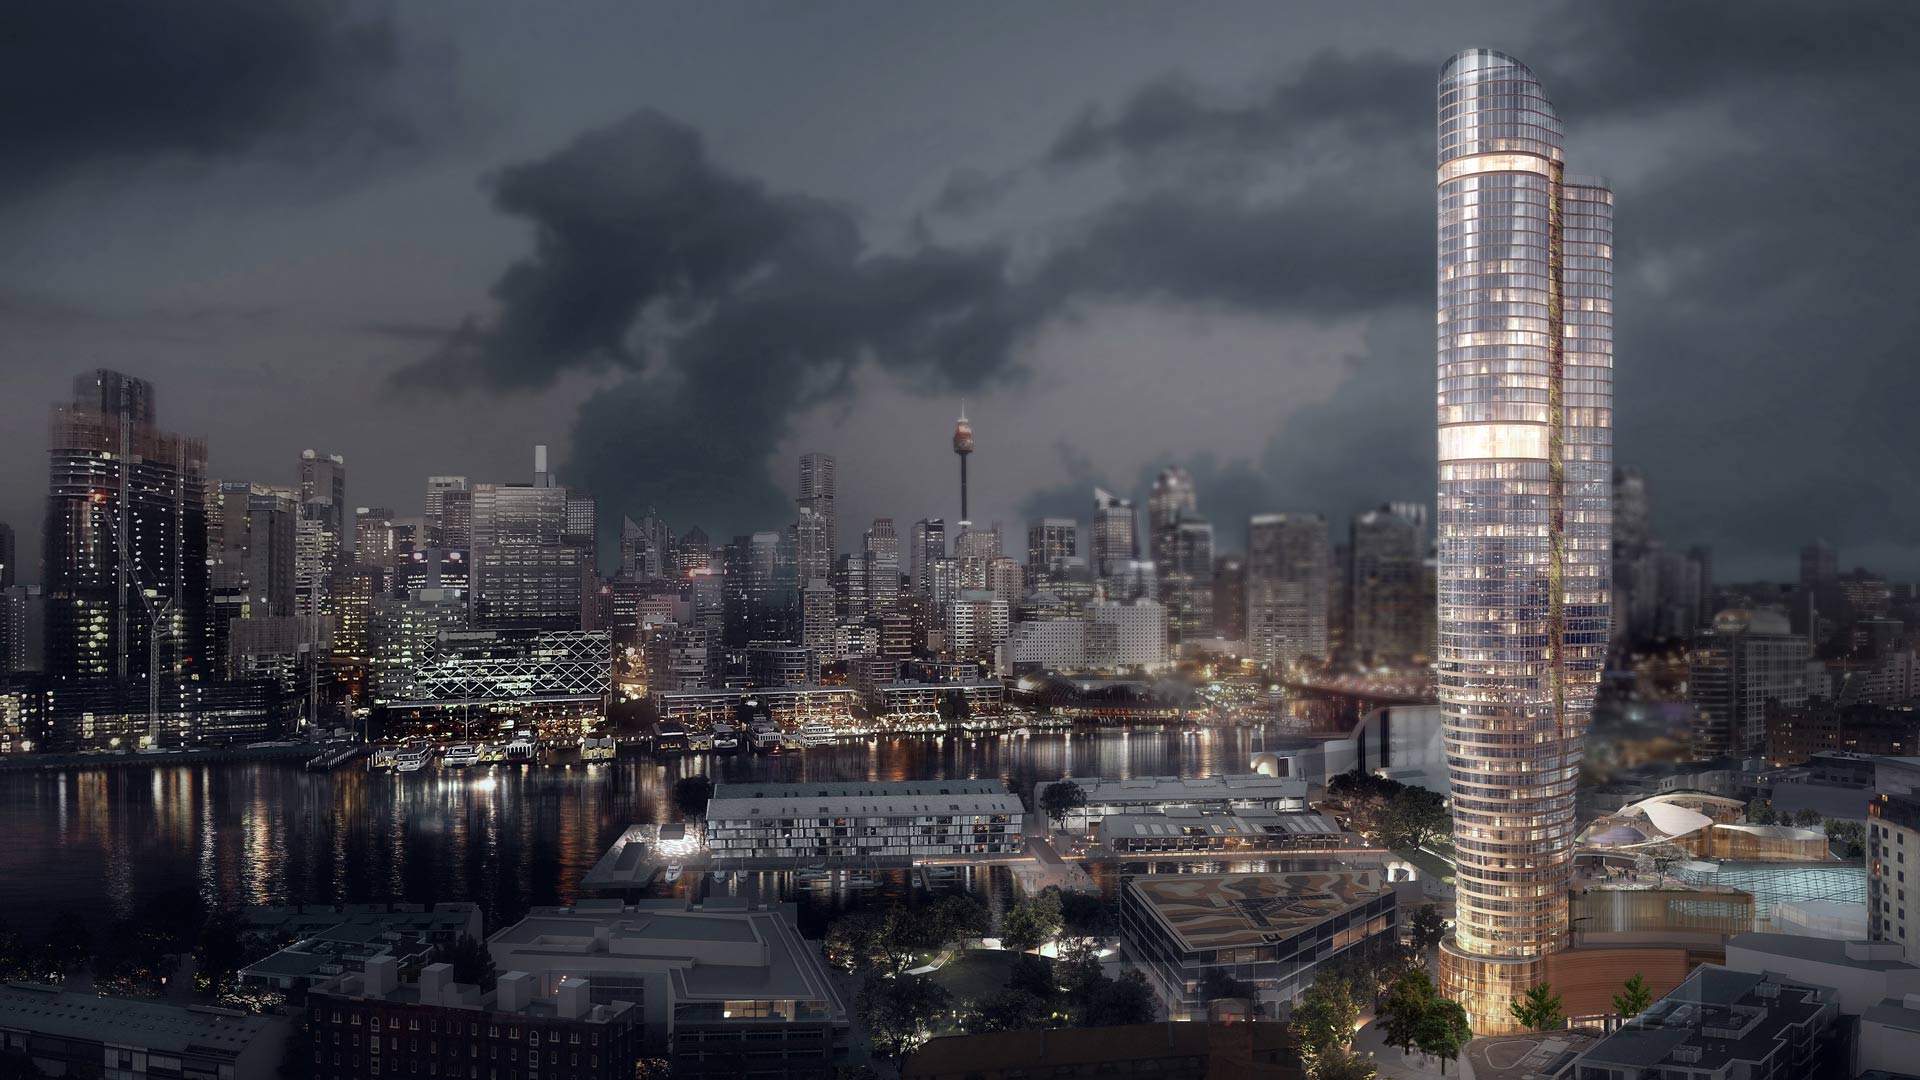 Sydney Could Soon Be Home to an Ambitious 61-Storey Hotel at The Star